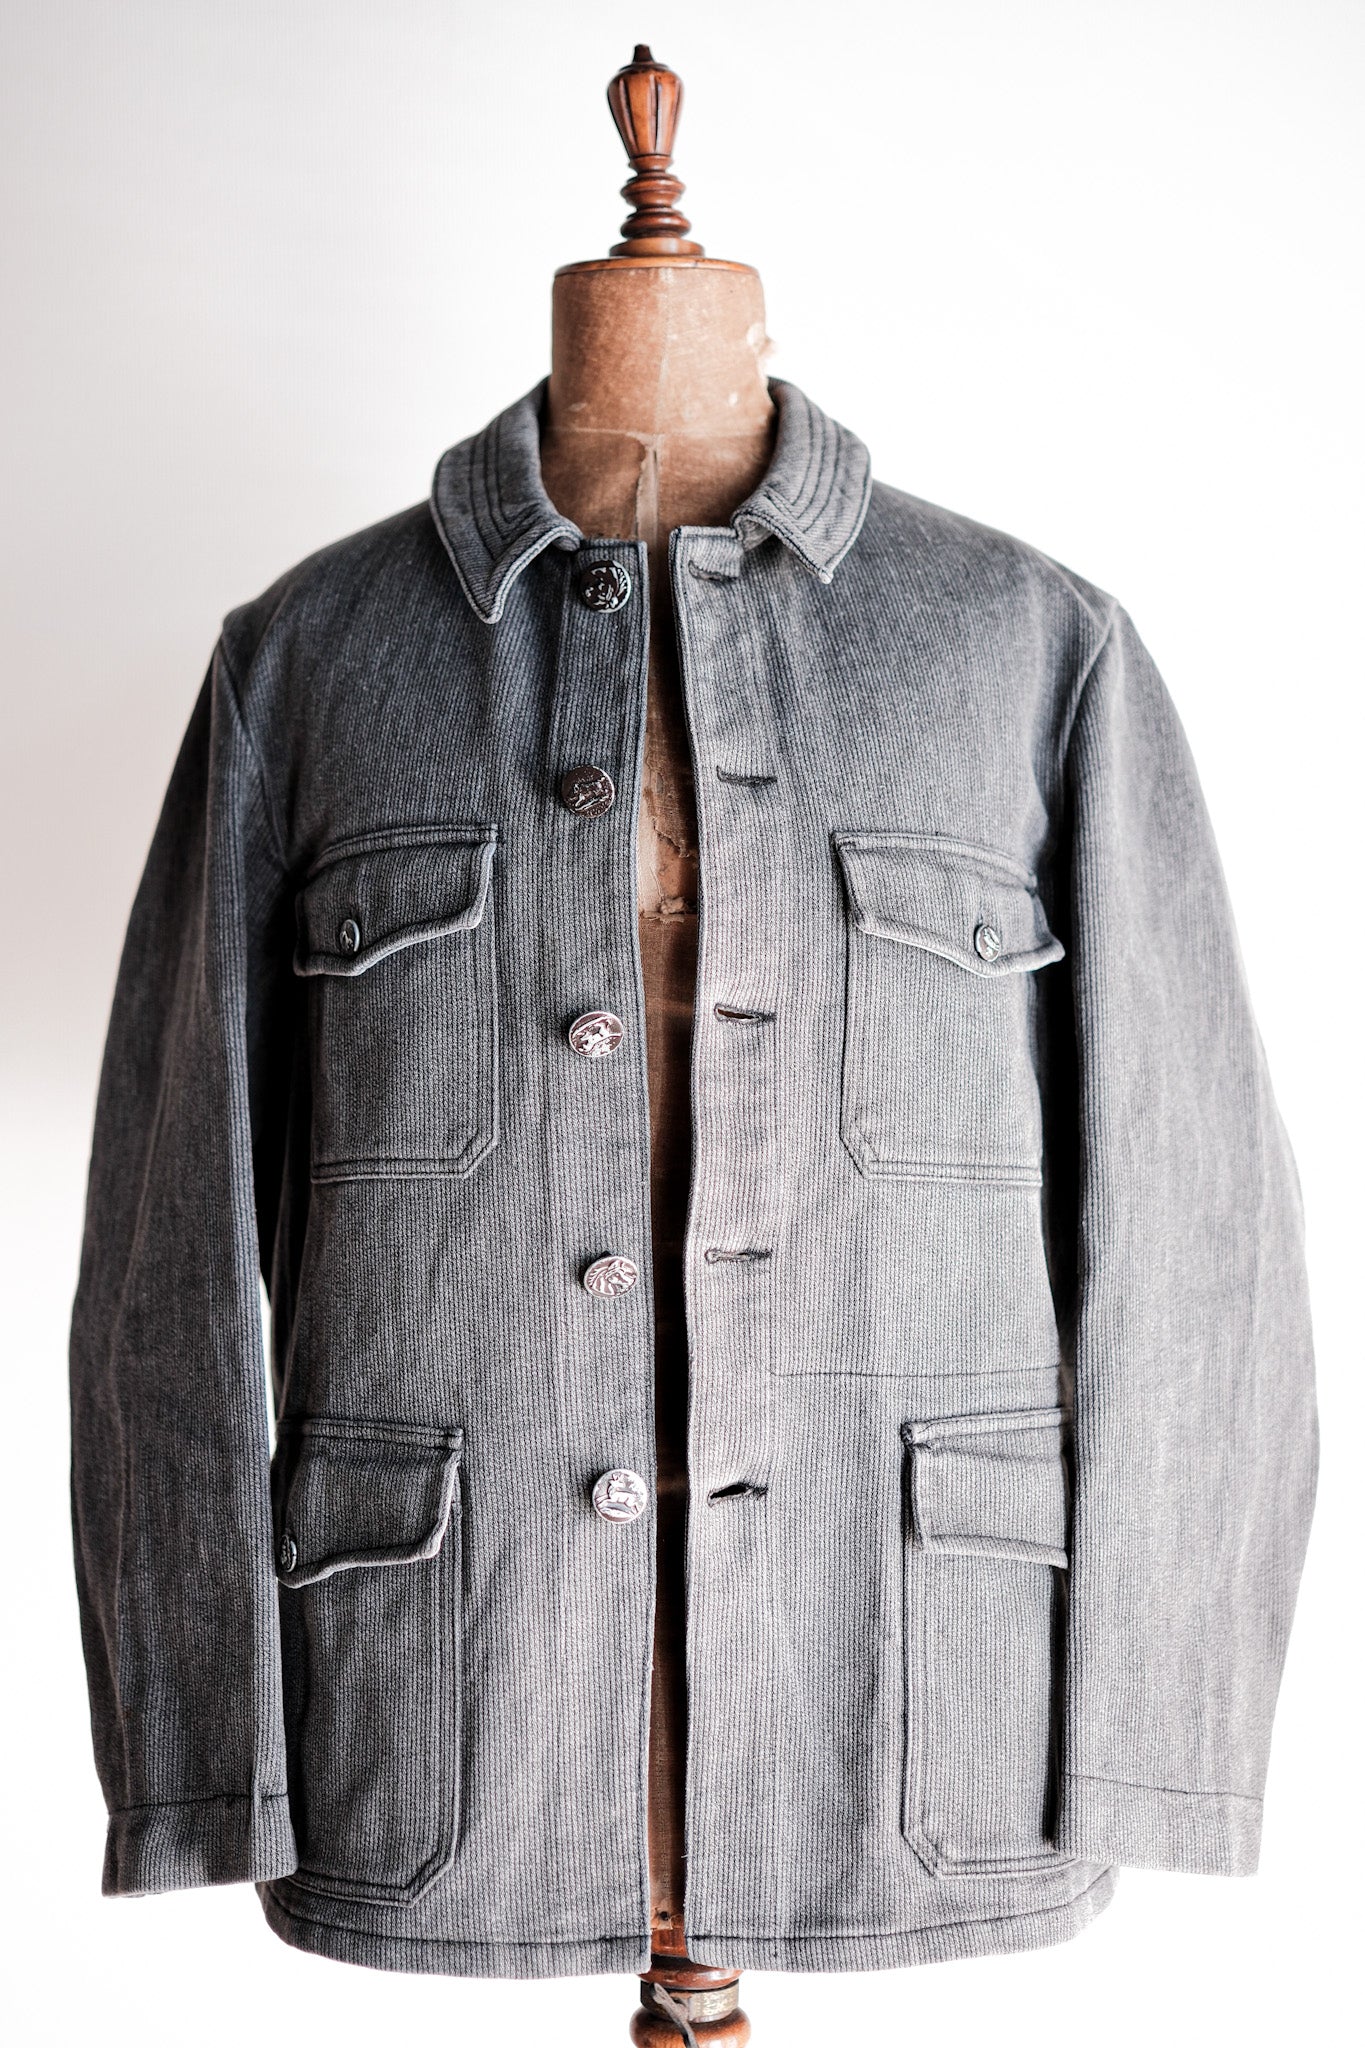 [~ 60's] French Vintage Gray Cotton Pique Hunting Jacket